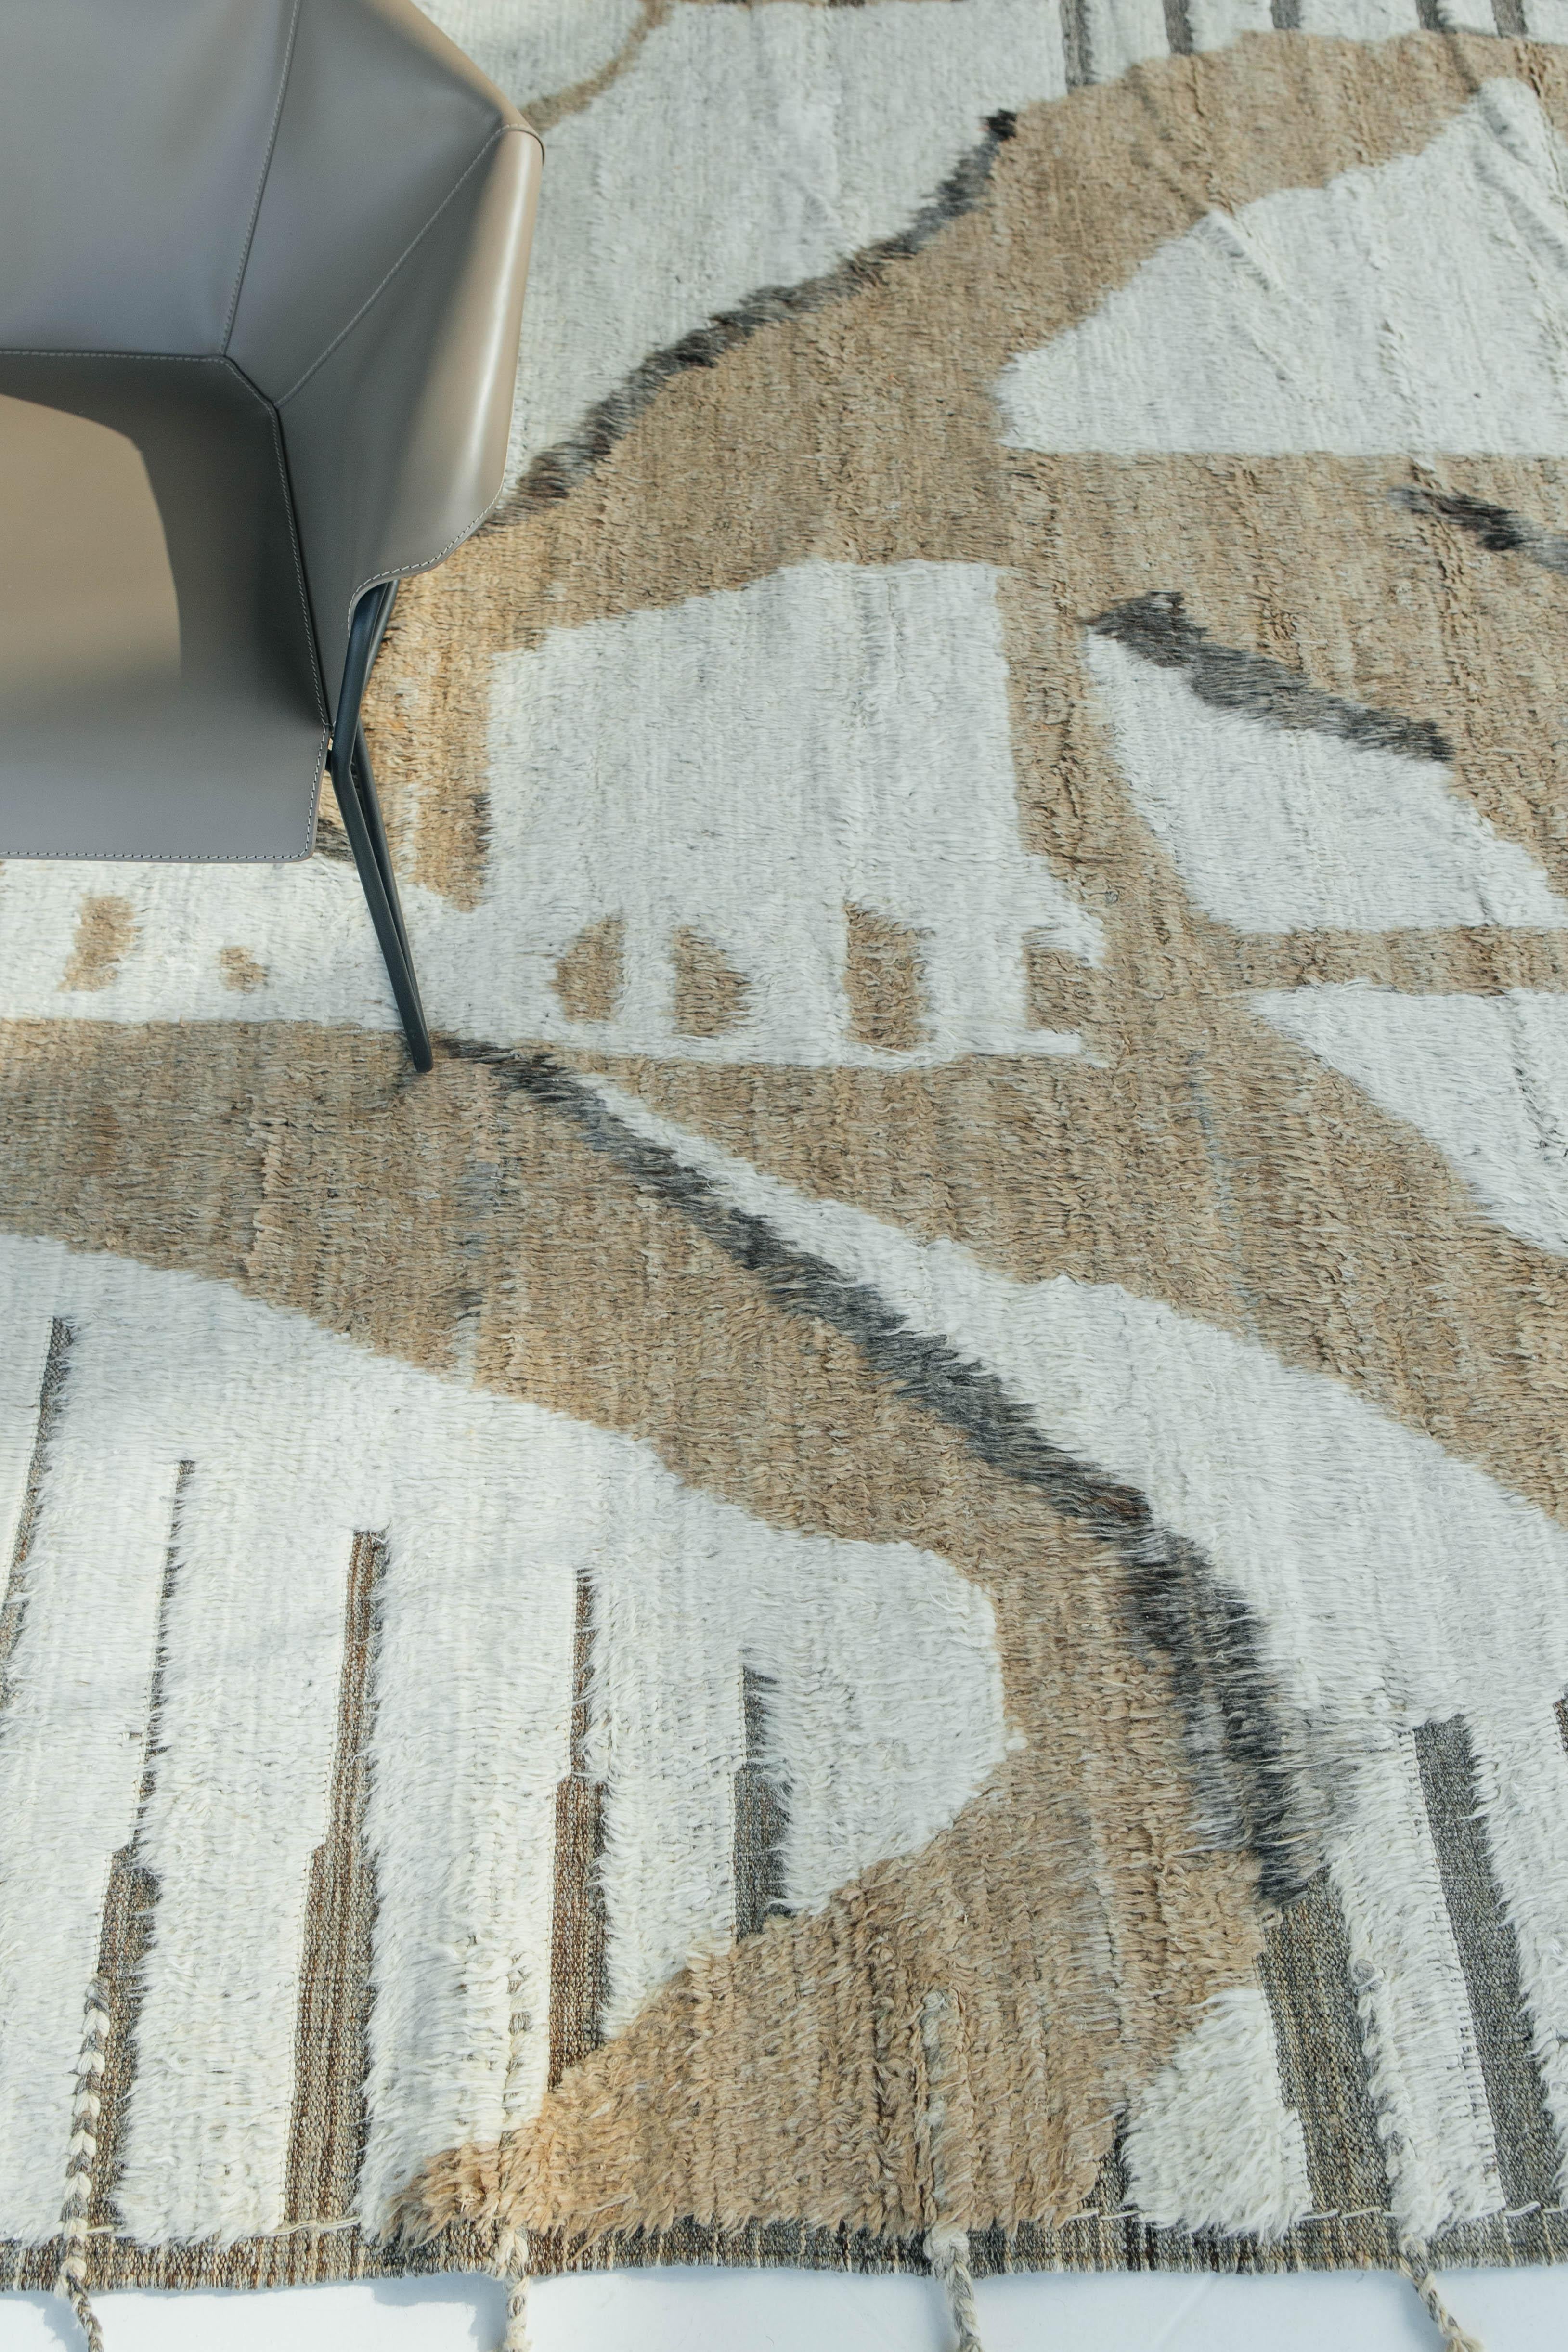 Handwoven white shag rug with soft brown orange and grey motifs inspired by Scandinavian design elements recreated for the modern design world. Aaksla can withstand high amounts of traffic, crafted to be lived on. Designed in Los Angeles.



Rug